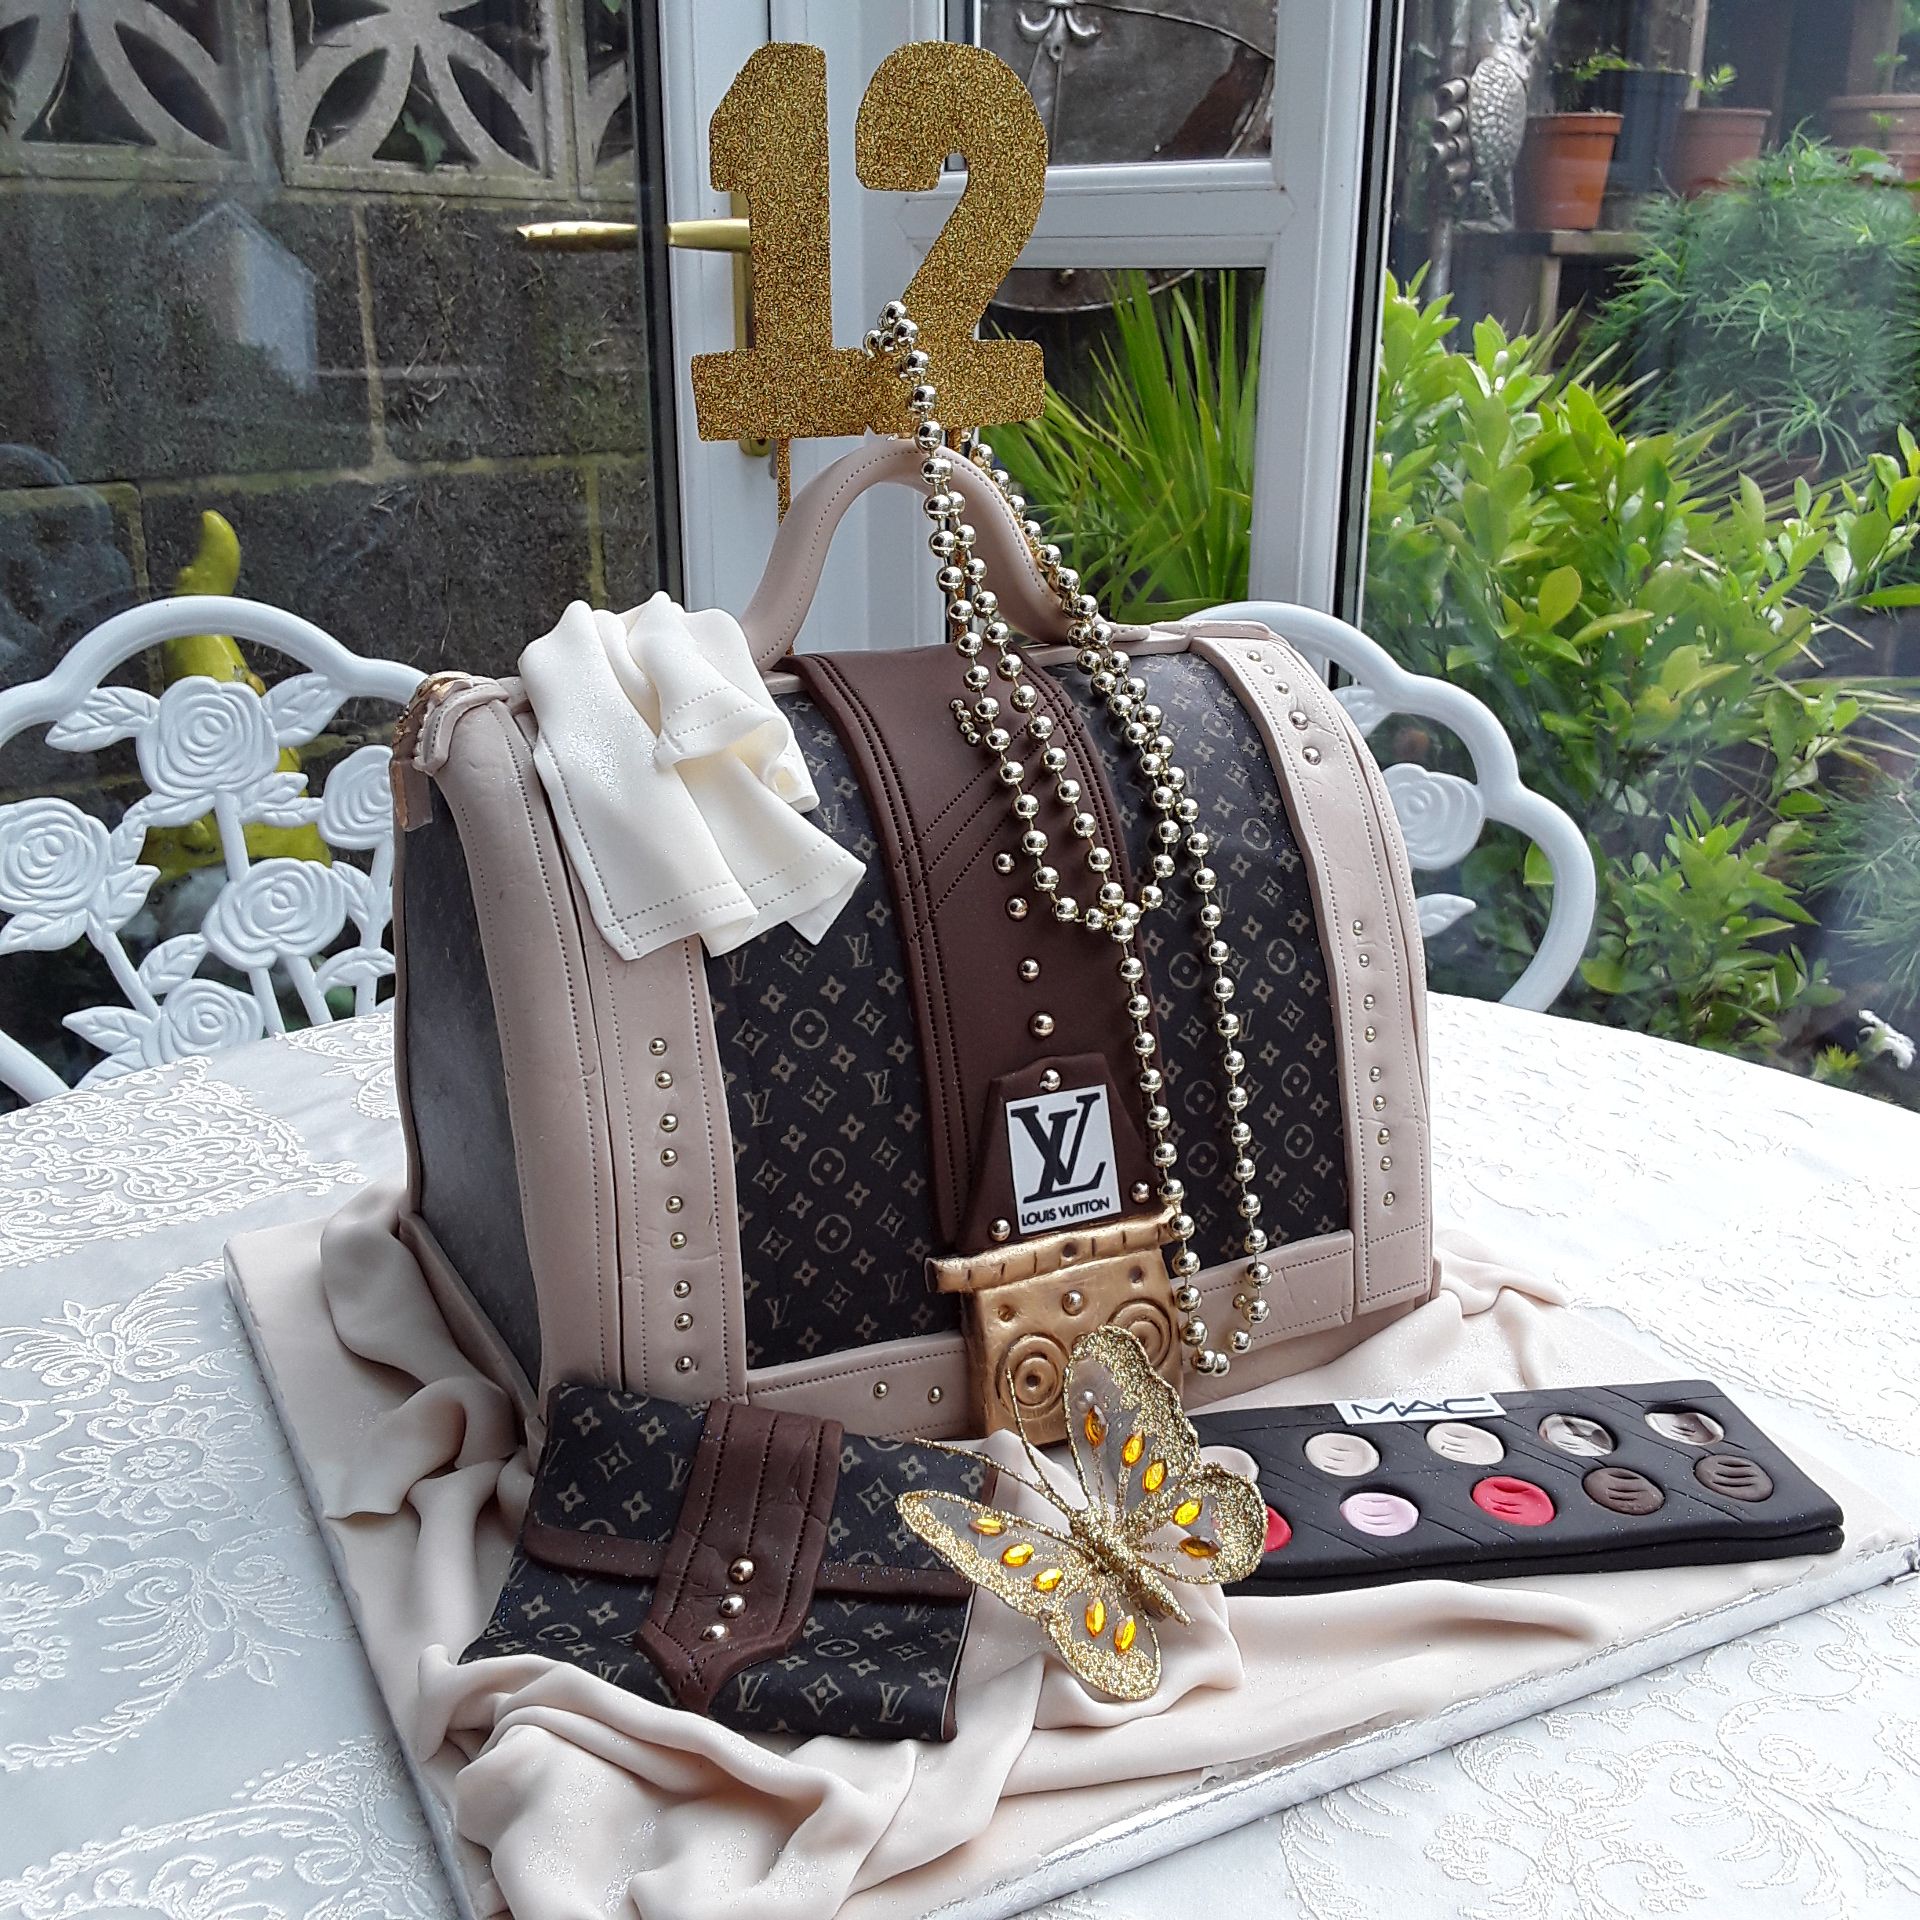 Shoes, Bags + Vanity case Cakes